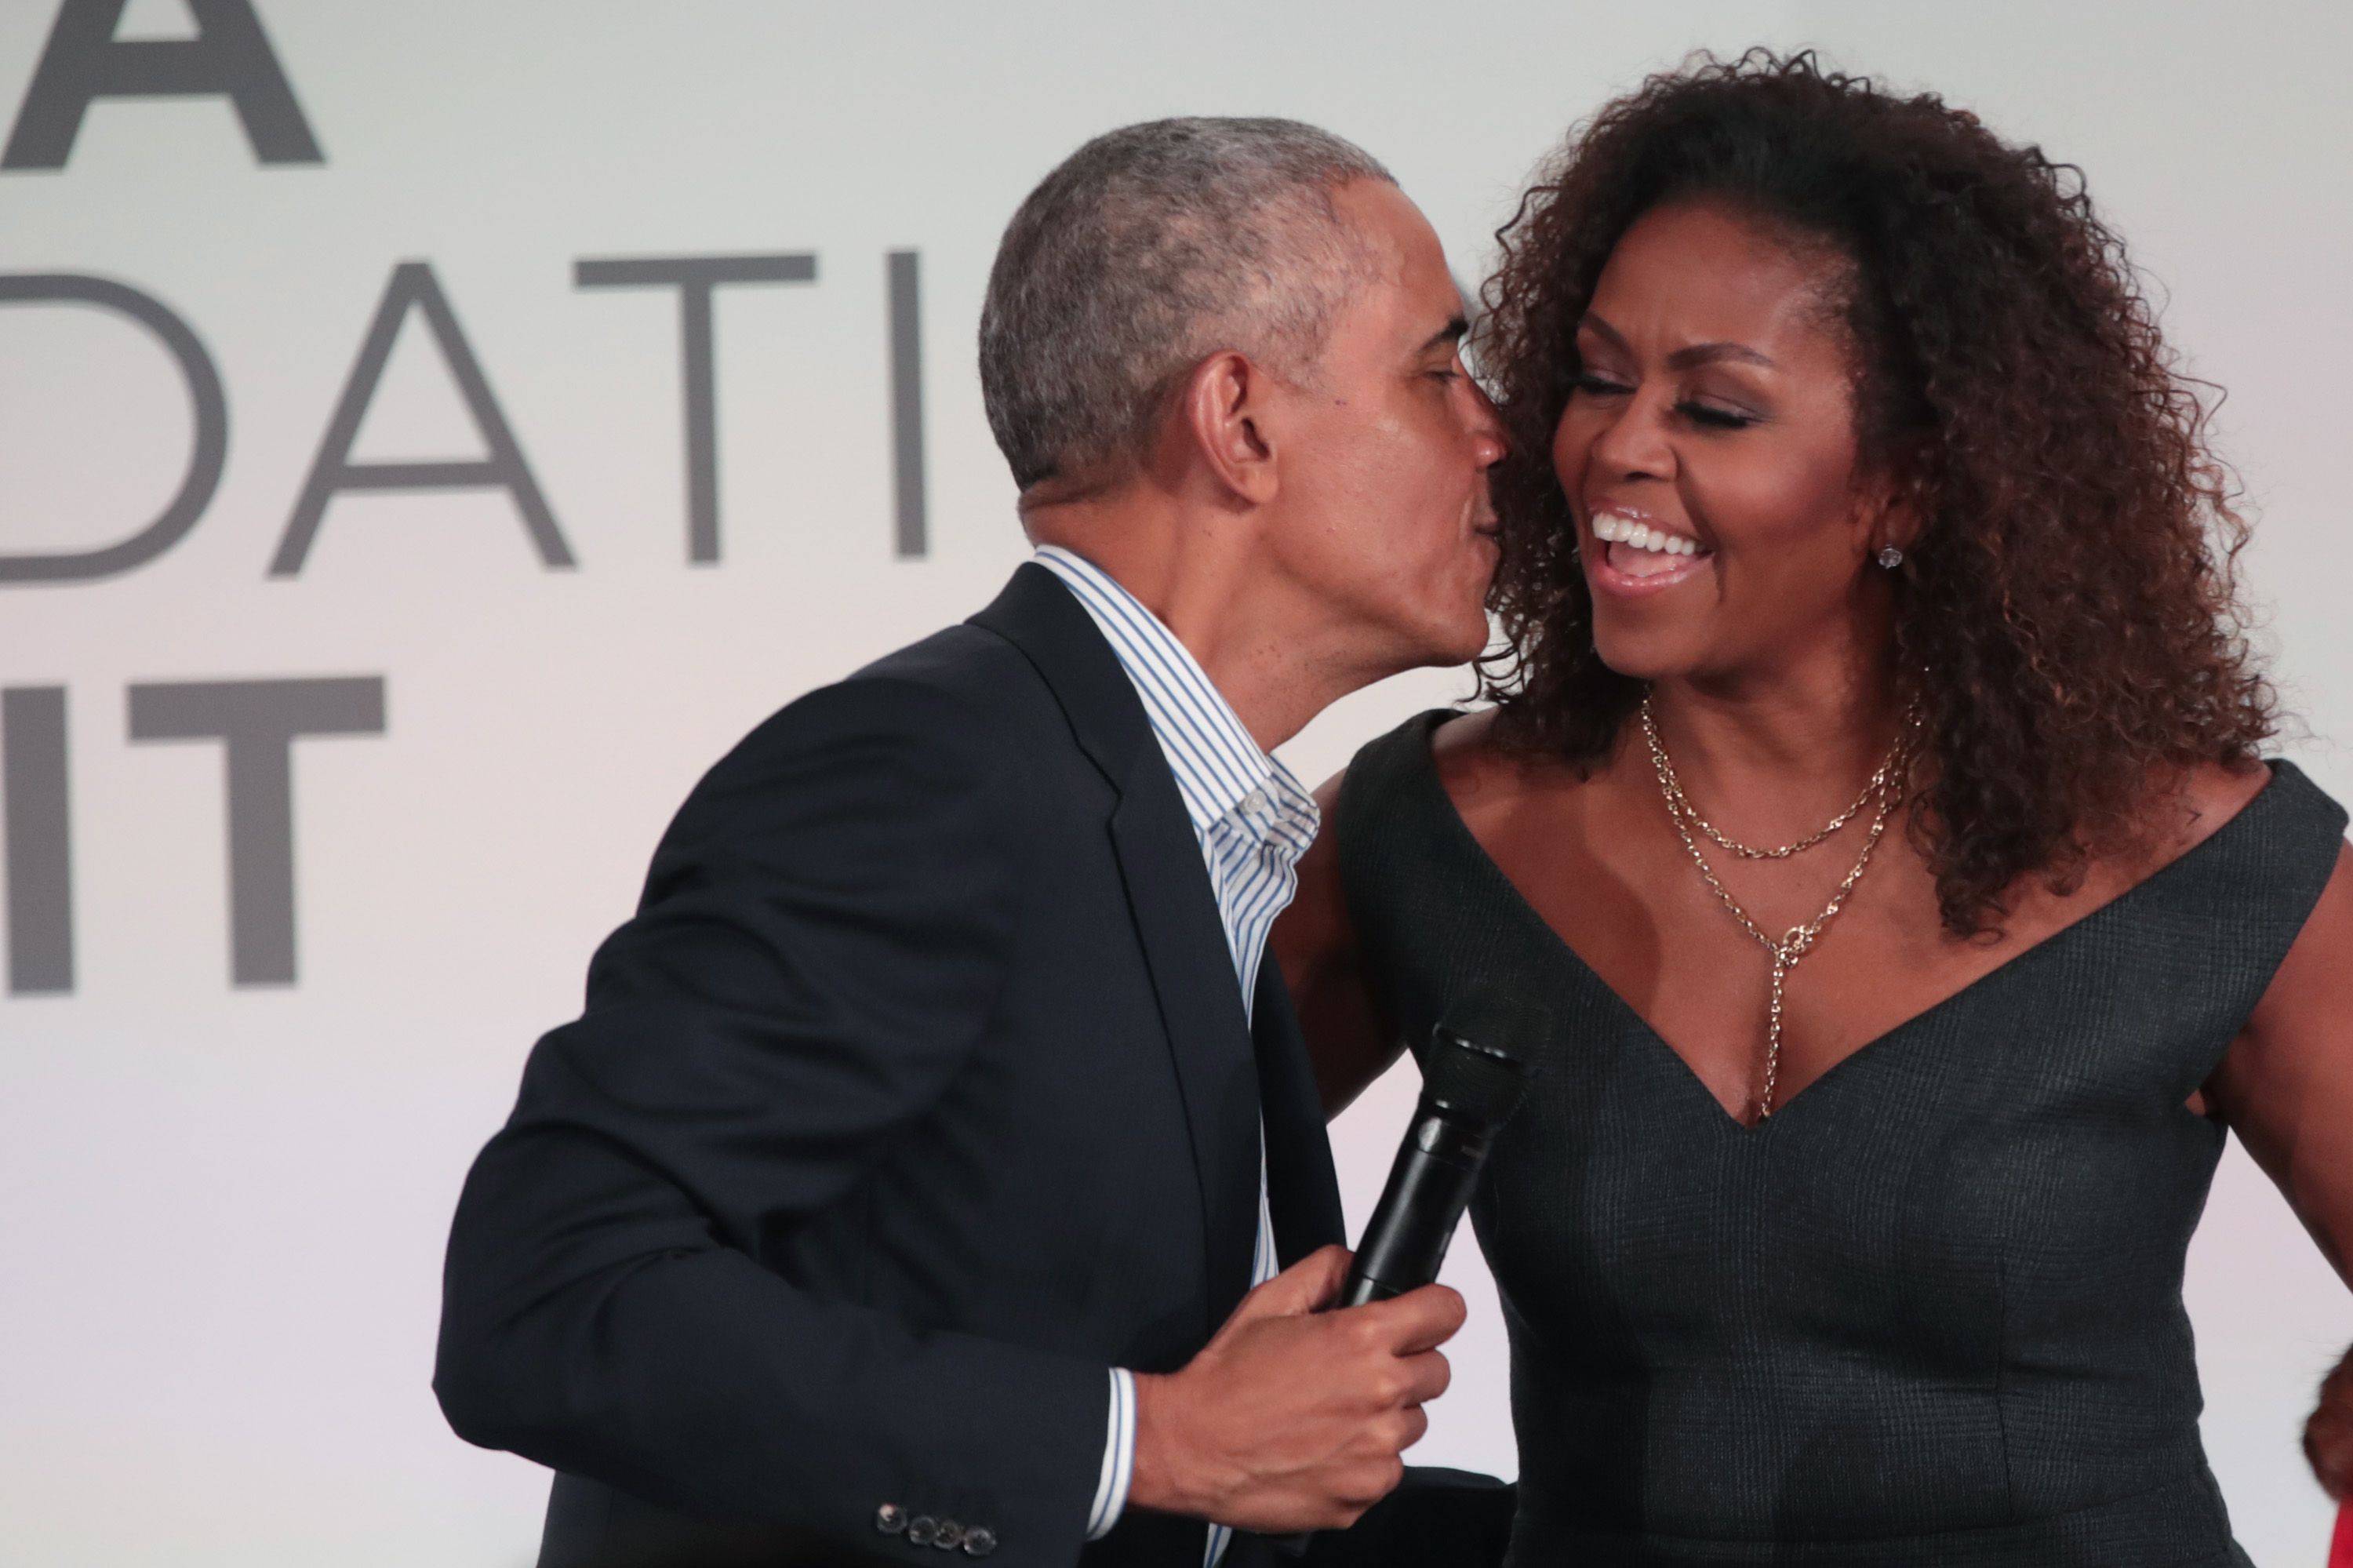 Barack Obama gives his wife Michelle a kiss as they close the Obama Foundation Summit on October 29, 2019 in Chicago, Illinois. | Photo: Getty Images